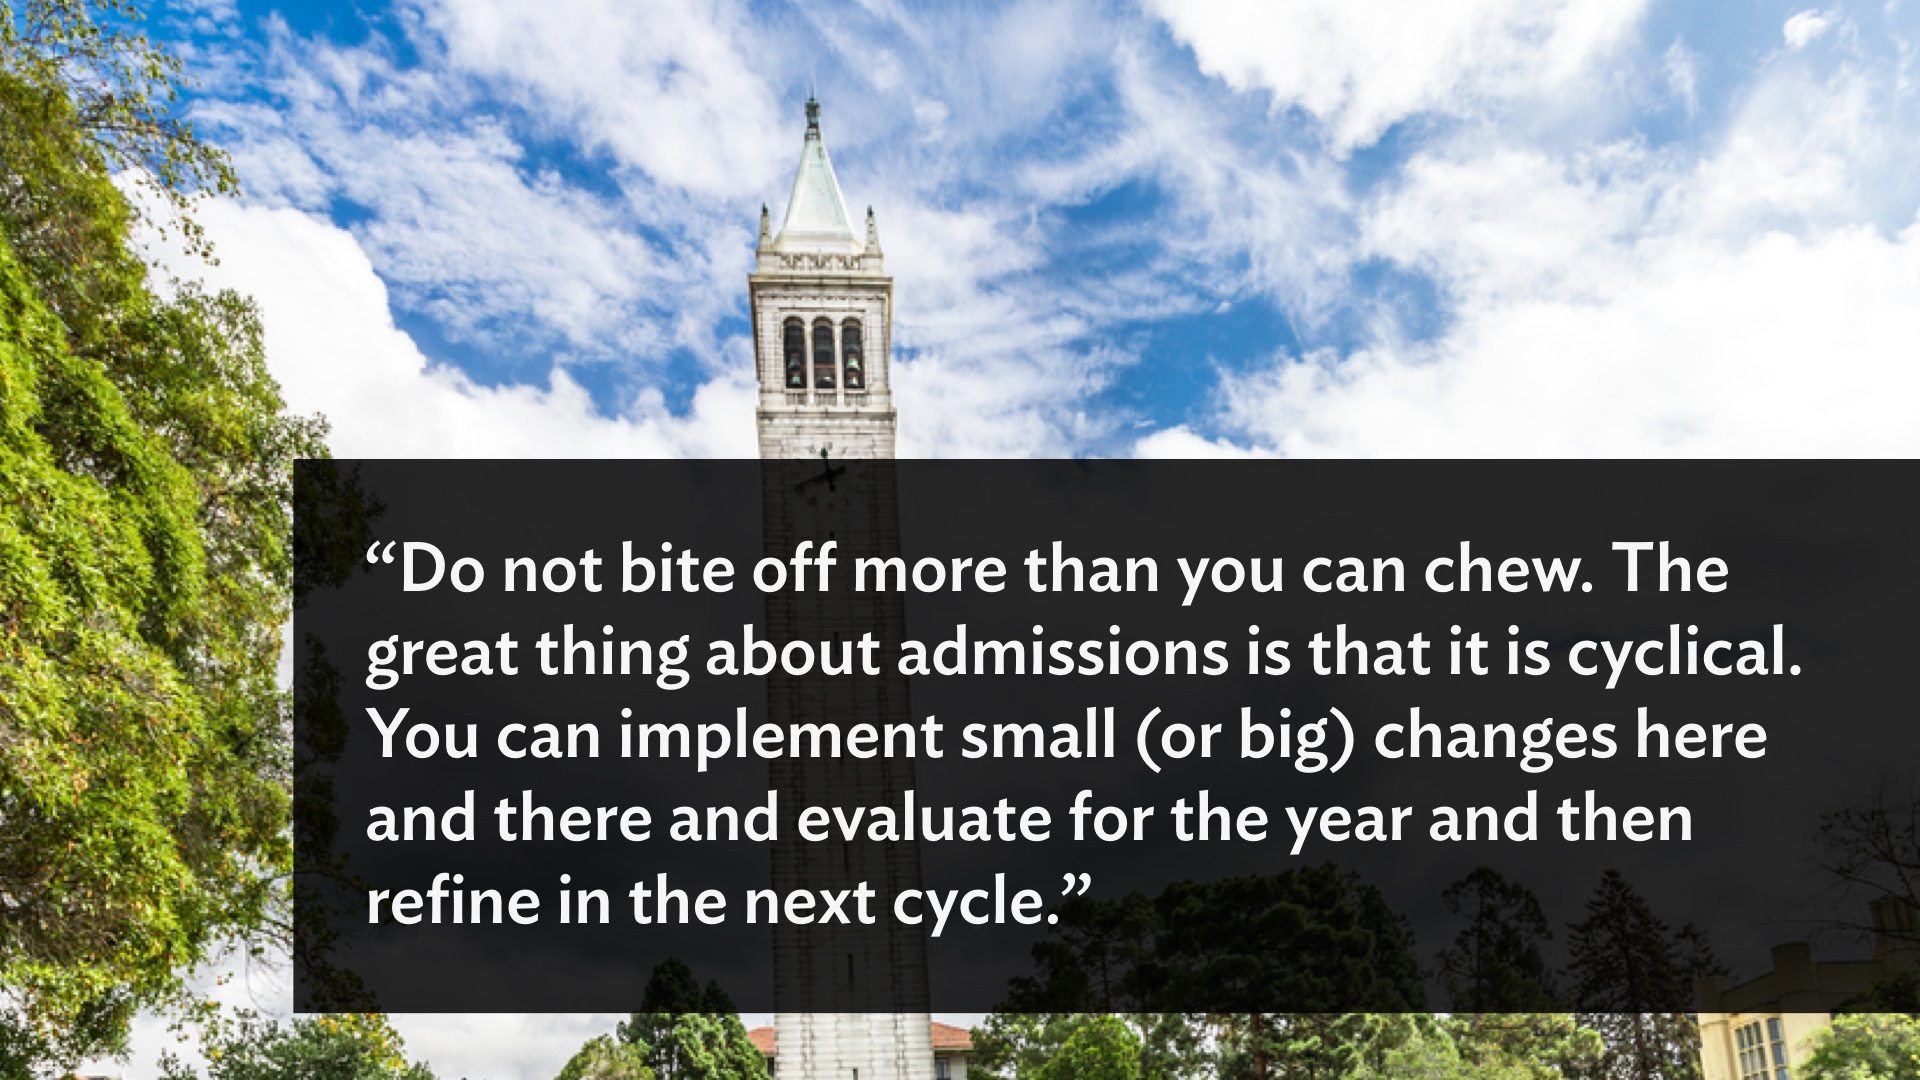 An emphasized quote from the interview overlayed on an image, the text on this image is already available in the holistic admissions interview transcript.